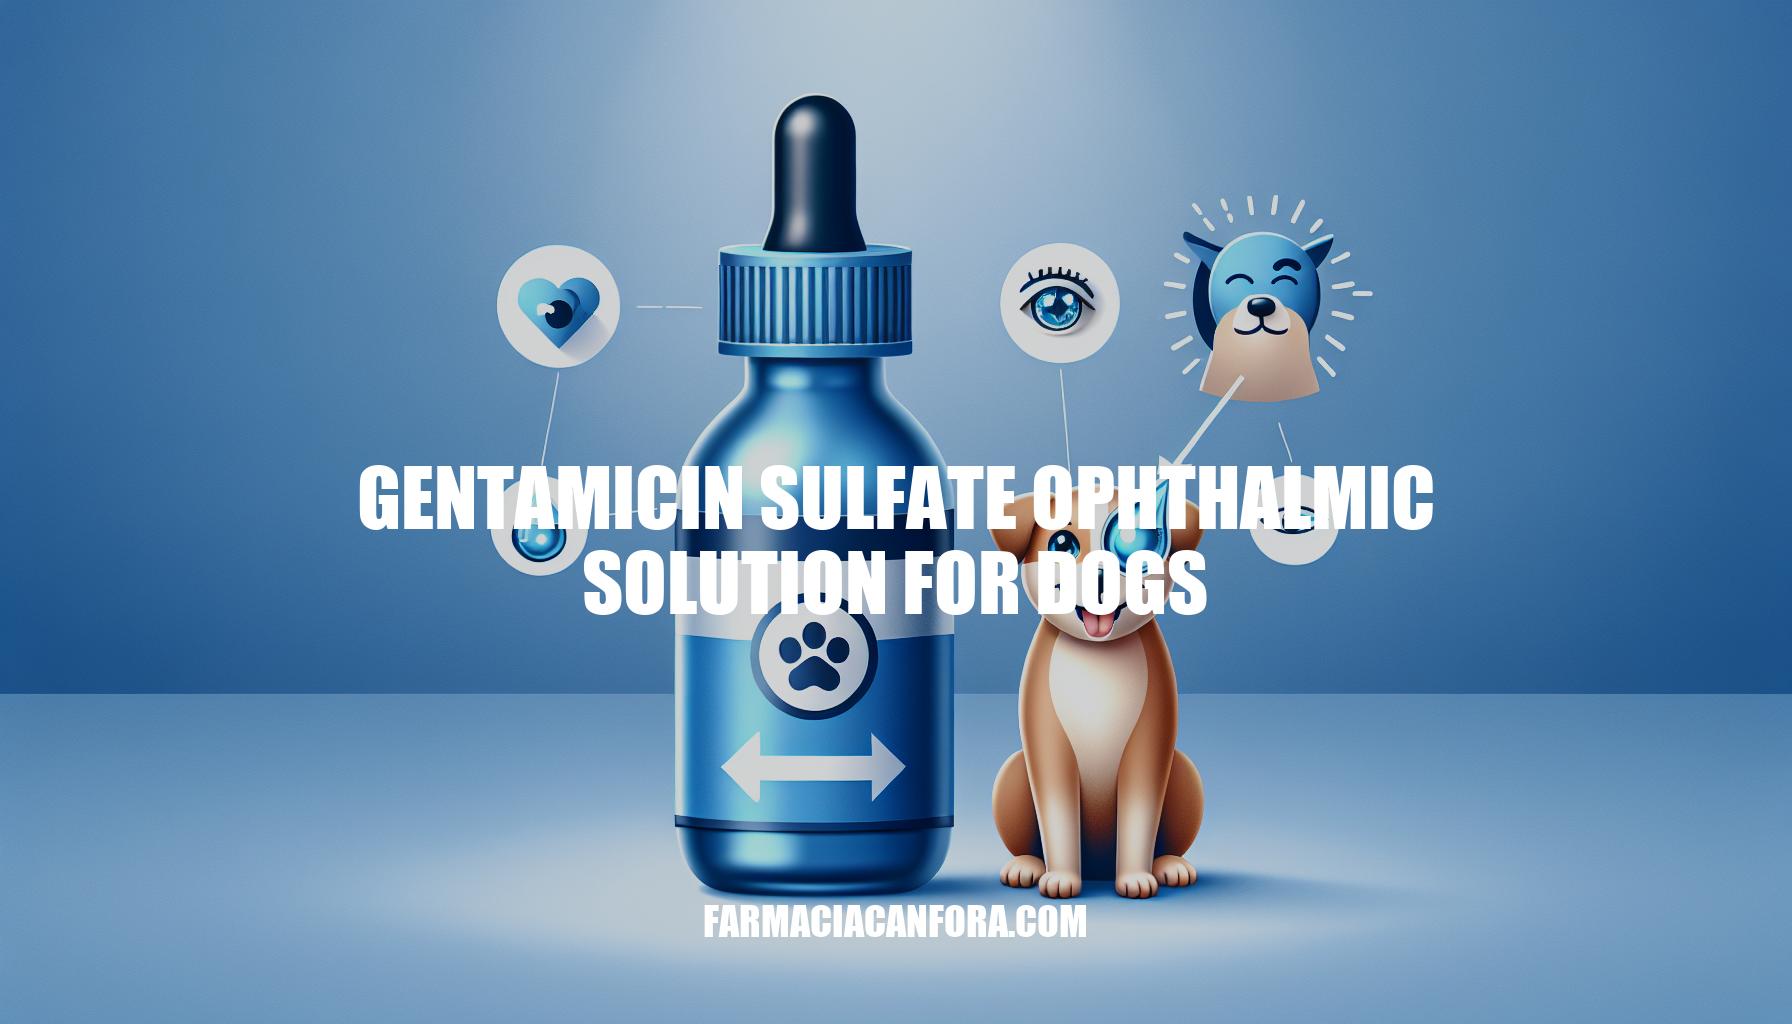 Gentamicin Sulfate Ophthalmic Solution for Dogs: Benefits and Usage